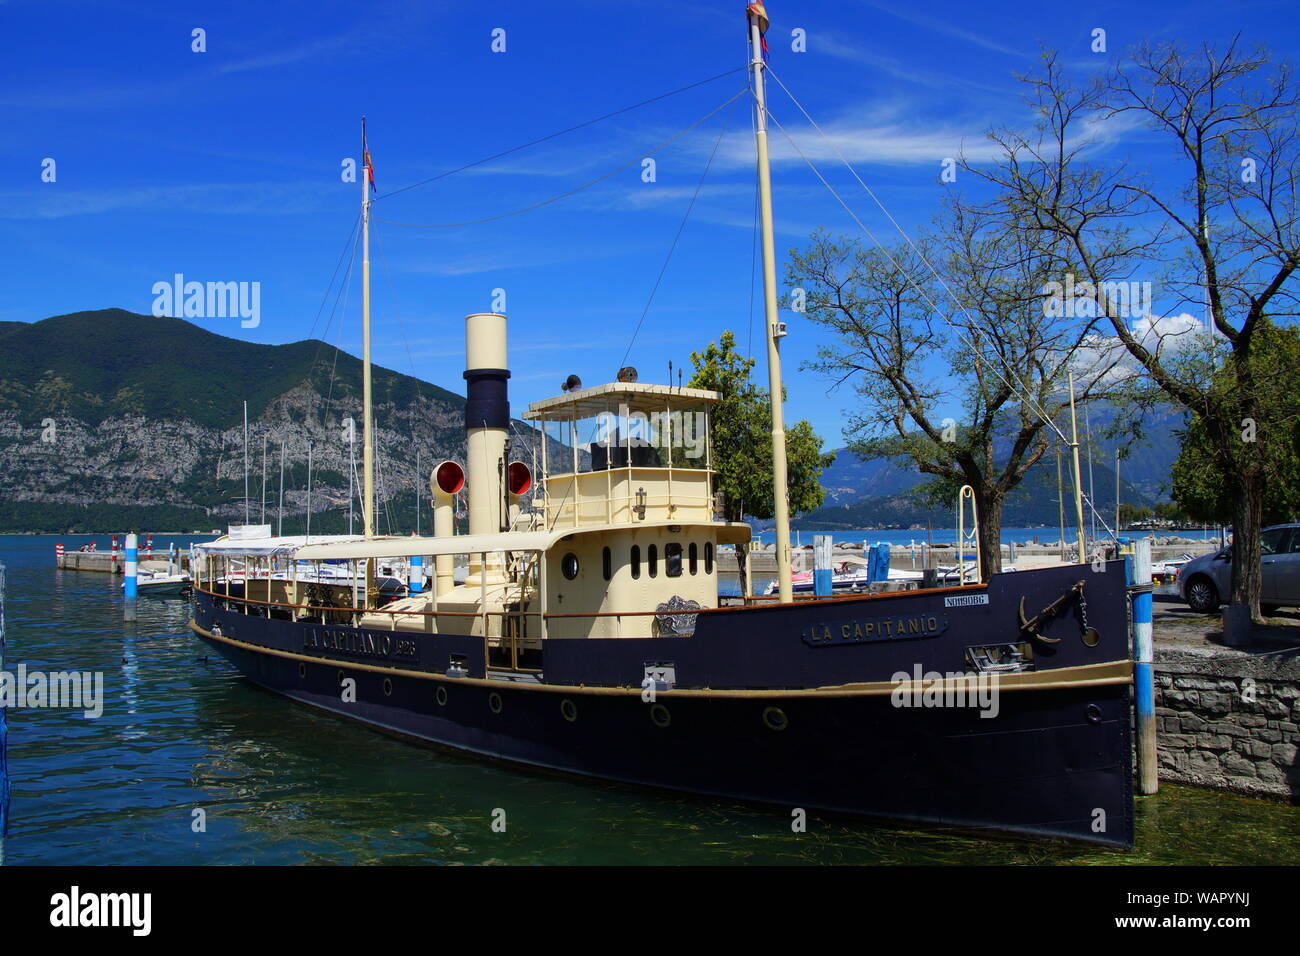 Lago d’Iseo, Lombardia, Italy - August 13, 2017: Steamship ''La Capitanio'' (1926) in the harbor of Iseo. Stock Photo